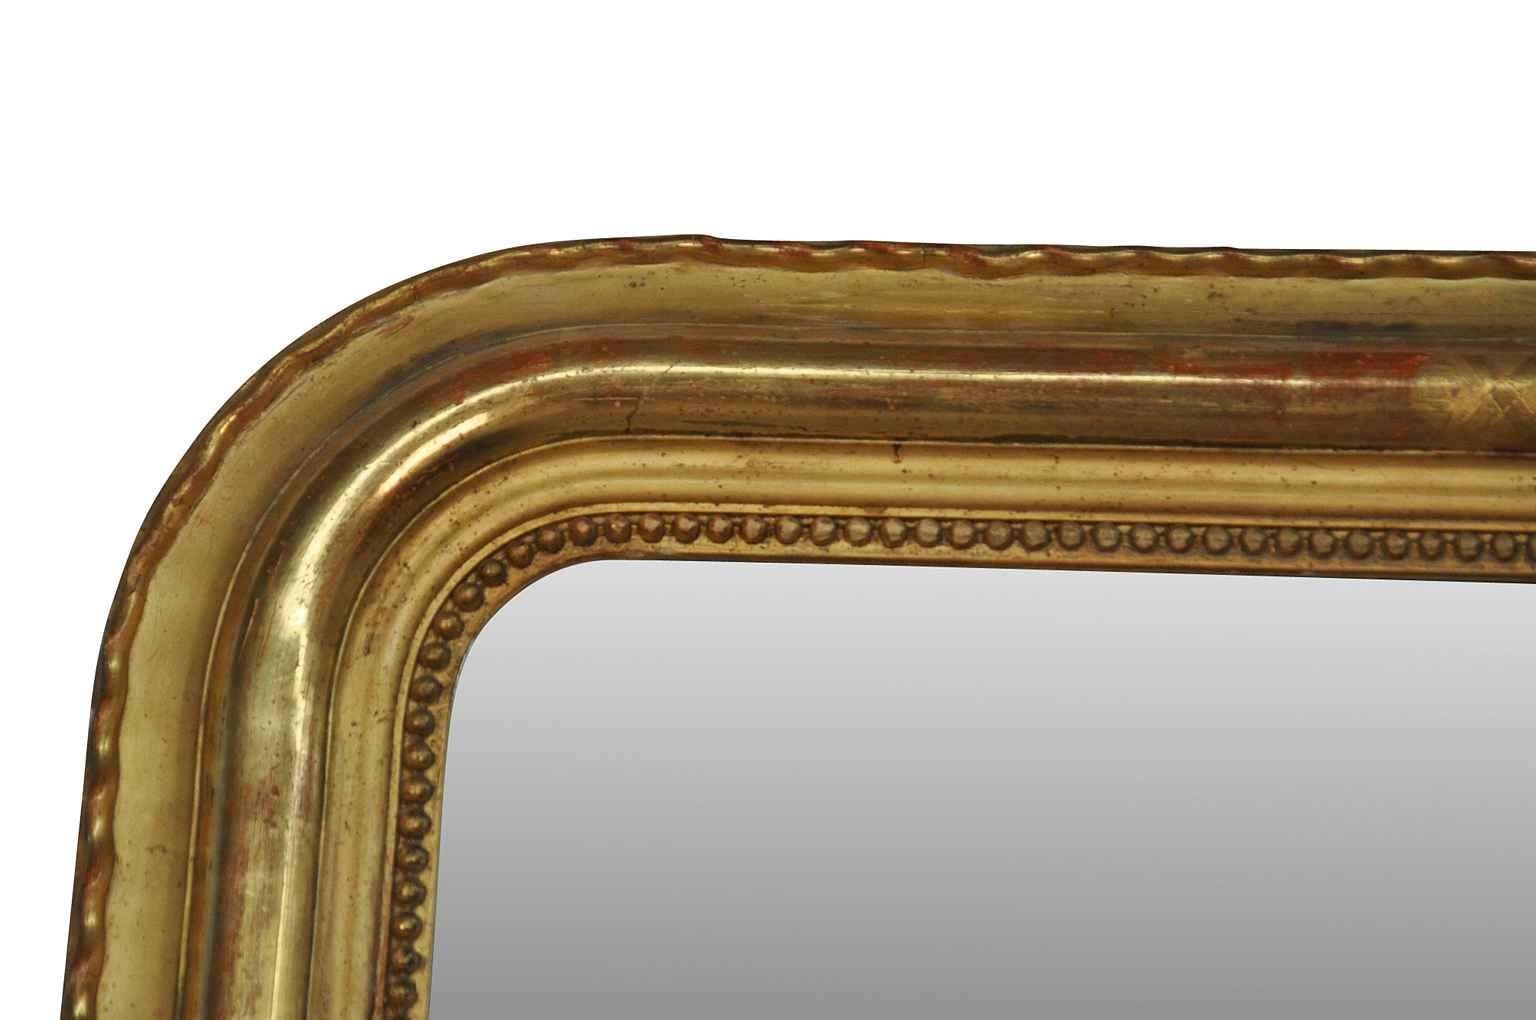 An absolutely outstanding and monumental Napoloeon III period mirror in giltwood. The shear size of this mirror is sensational just shy of 9 feet. Beautifully adorned with an "x" pattern in water gilding. Original mercury glass mirror. The